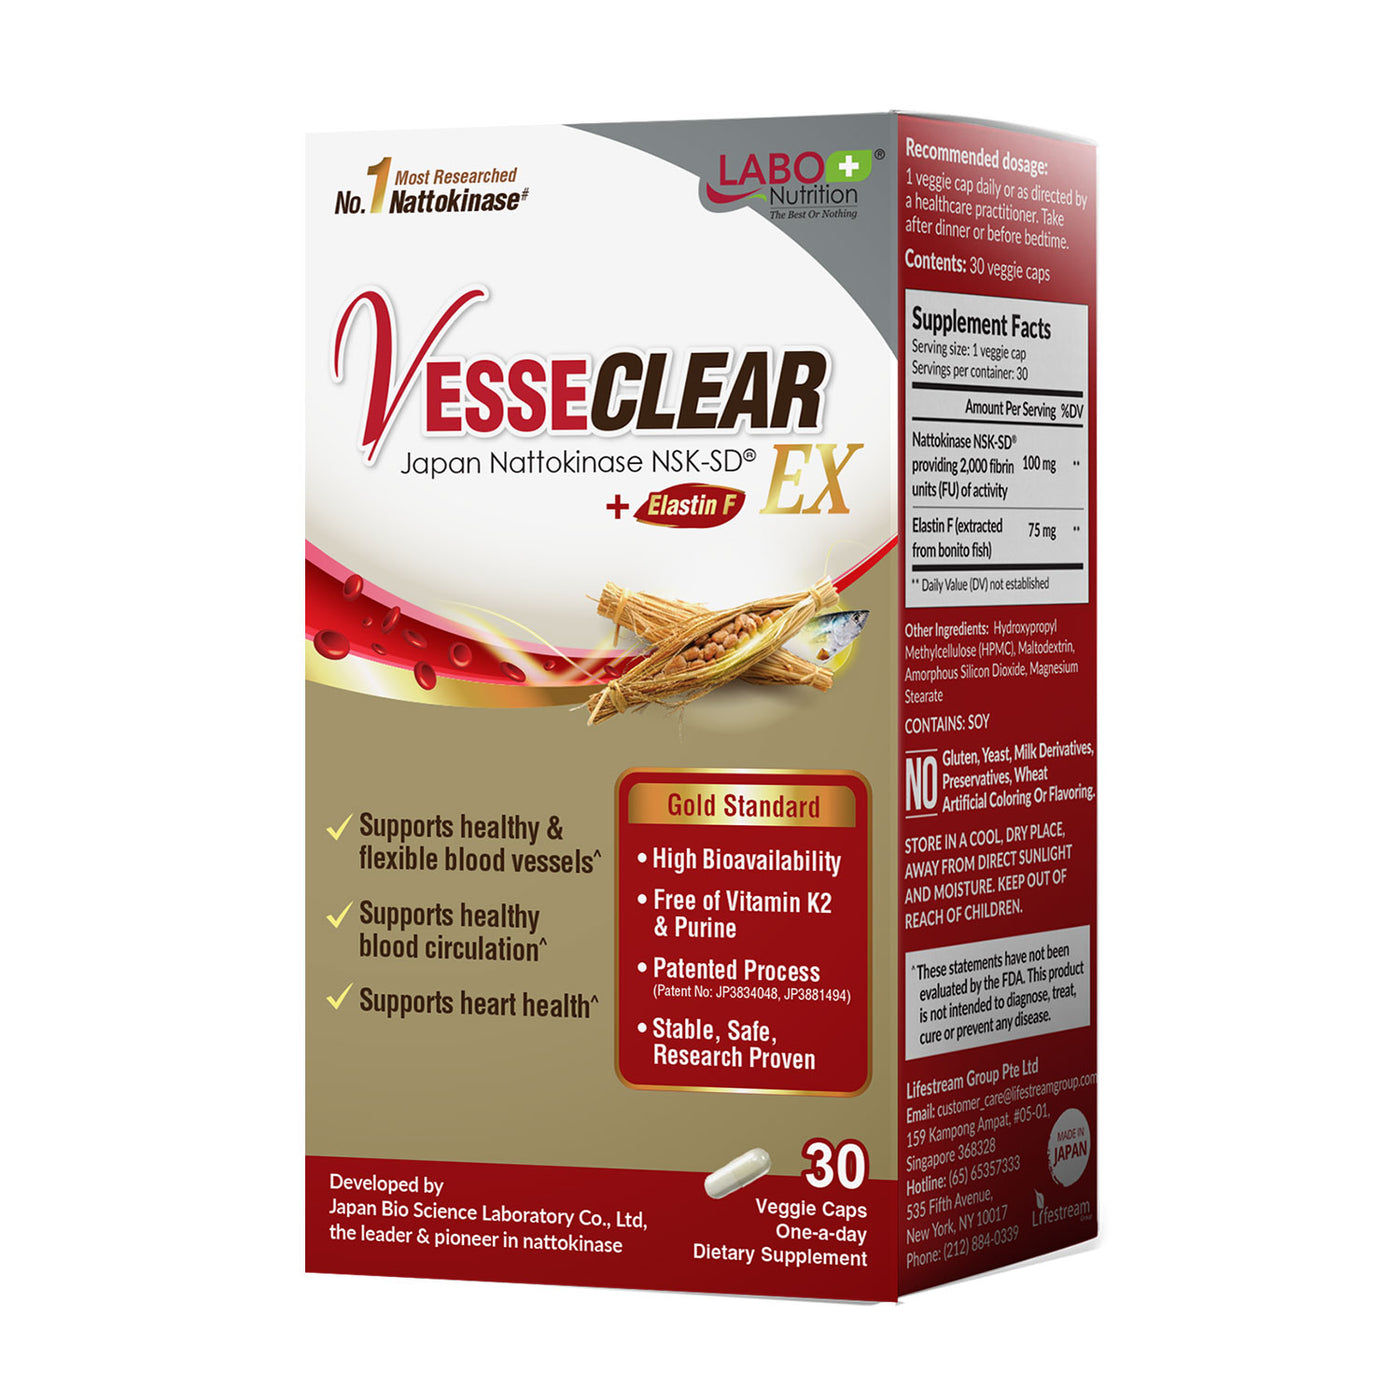 LABO Nutrition VesseCLEAR EX: Nattokinase NSK-SD+Elastin F for Clean & Flexible Blood Vessel. Japan's Most Clinically Studied, Functional Dose, For Cardiovascular, Blood Pressure & Circulation Support - Lifestream Group US